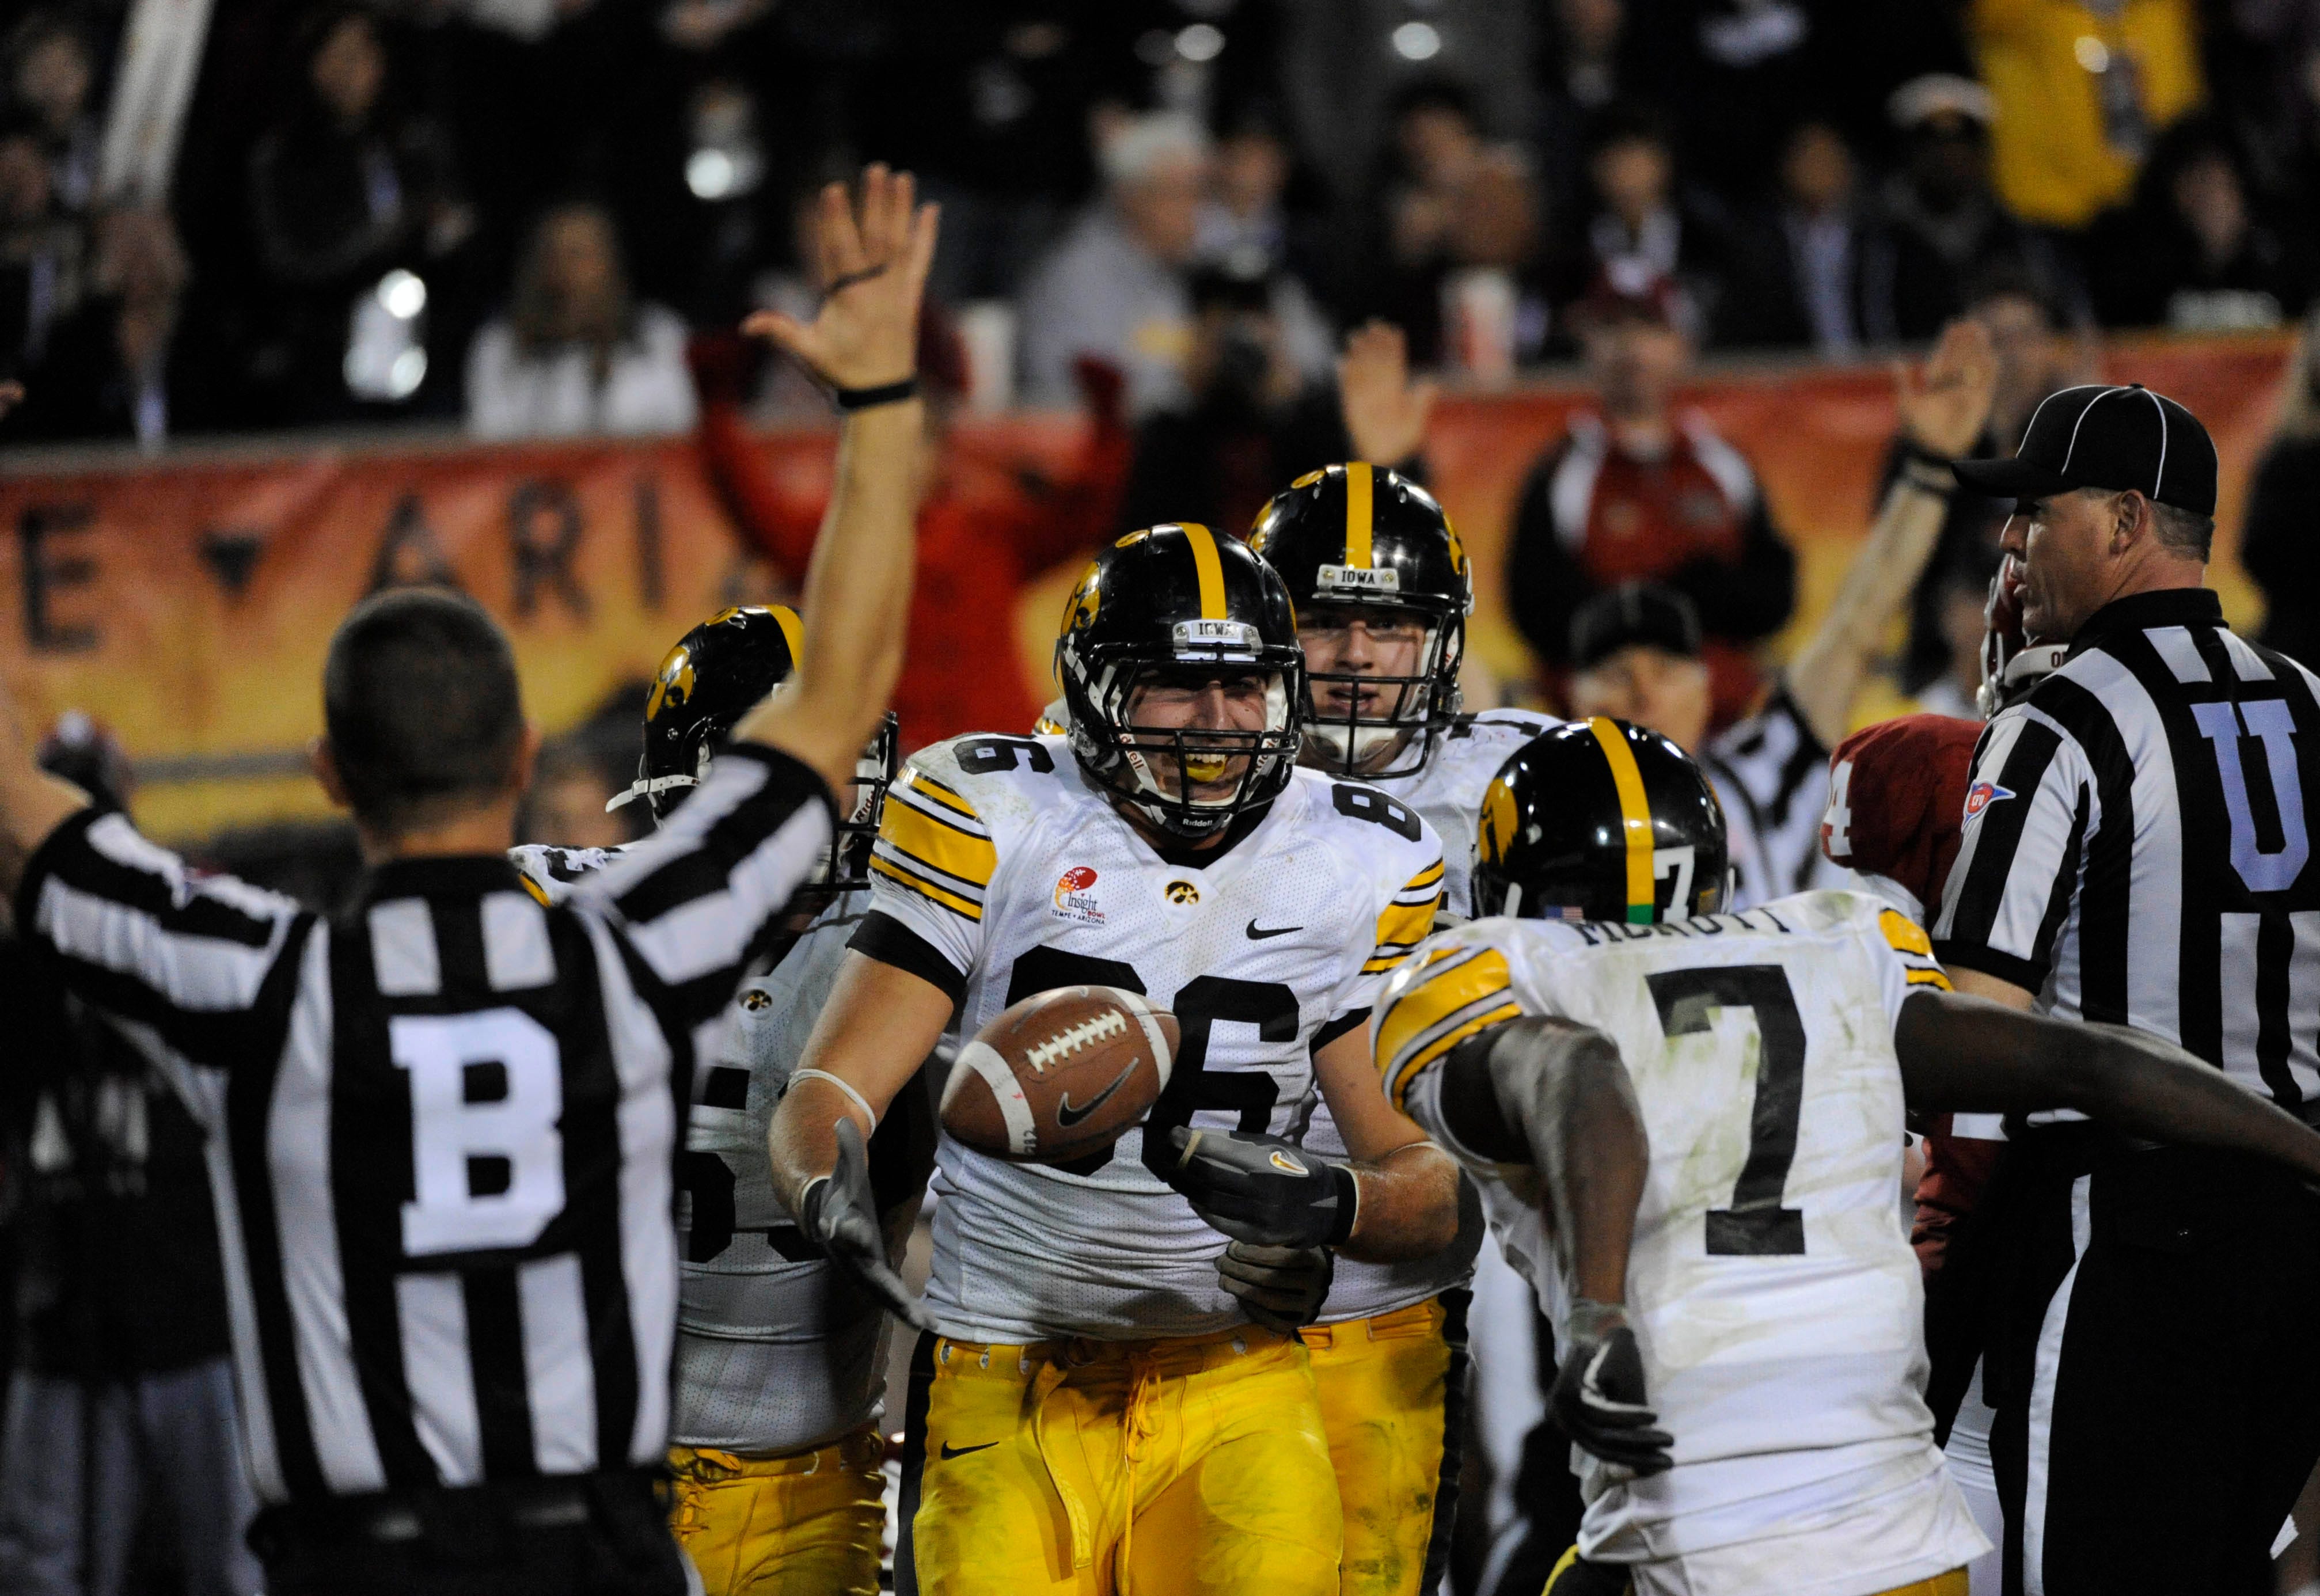 Dec 30, 2011; Tempe, AZ, USA; Iowa Hawkeyes tight end C.J. Fiedorowicz (86) and wide receiver Marvin McNutt (7) celebrate a touchdown against Oklahoma Sooners during the second half of the 2011 Insight Bowl at the Sun Devil Stadium. Mandatory Credit: Richard Mackson-USA TODAY Sports